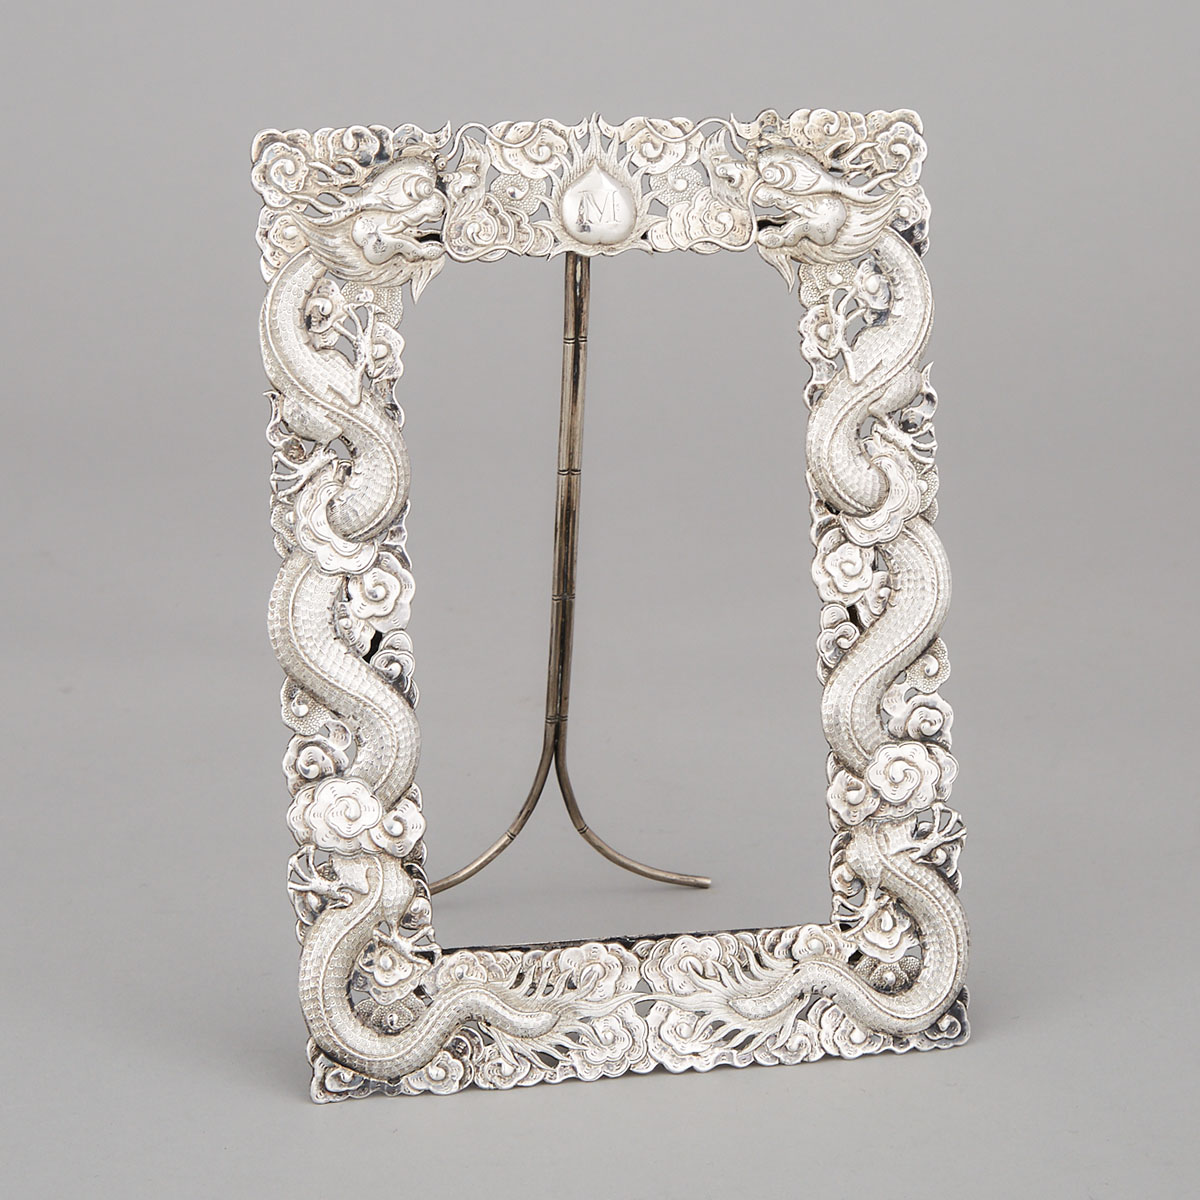 Chinese Export Silver Photograph Frame, Chun, for Hung Chong, Shanghai, early 20th century